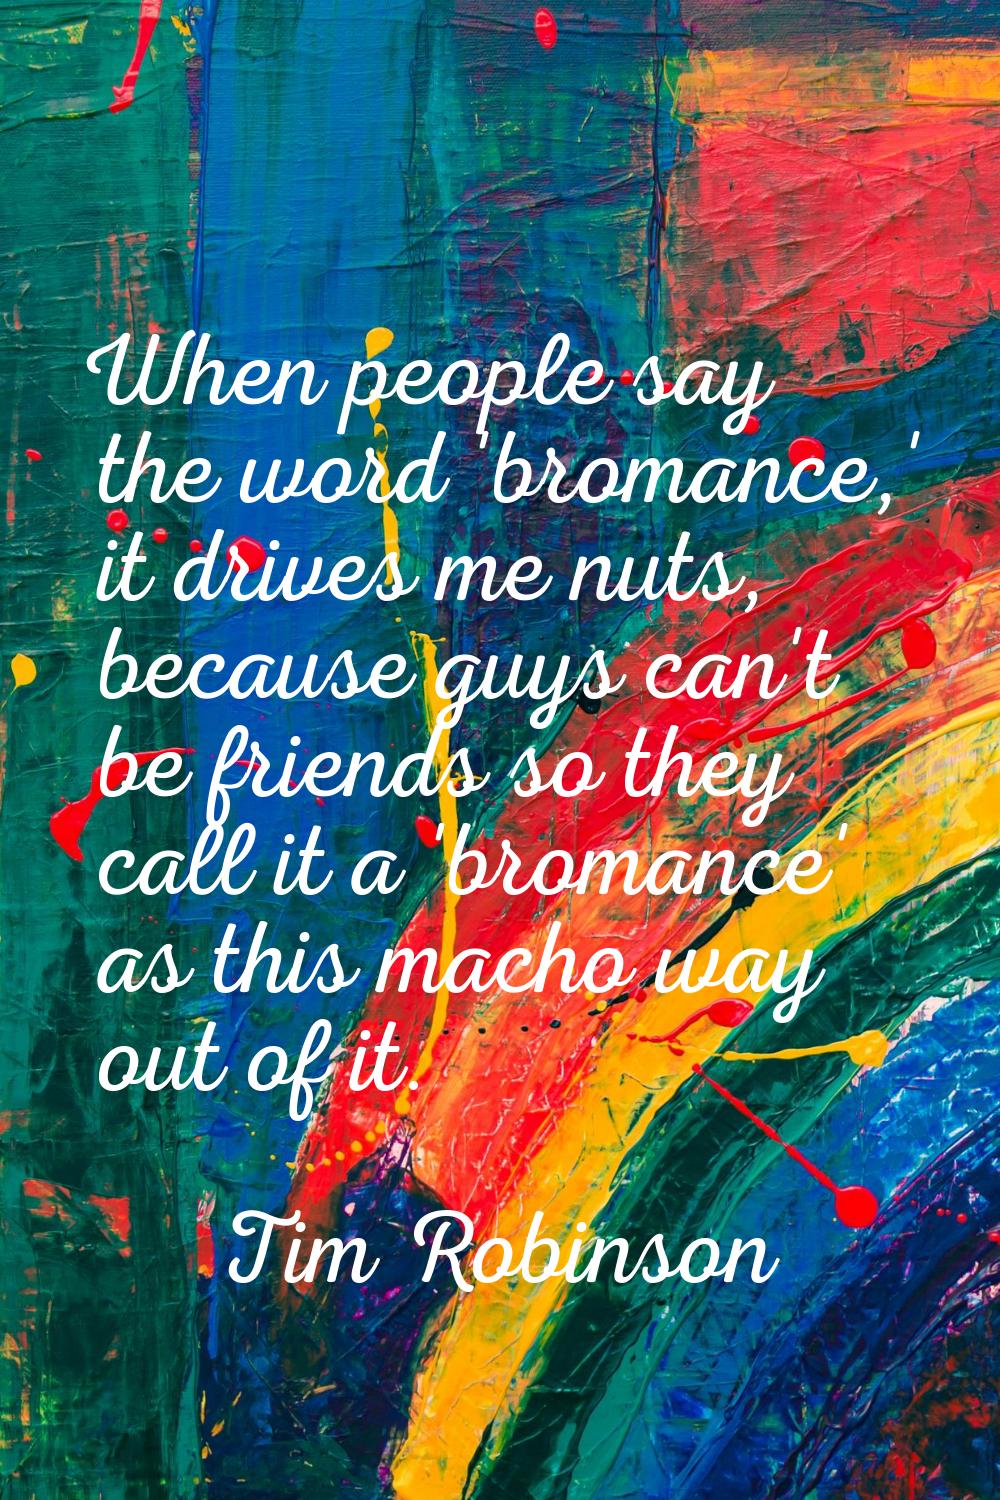 When people say the word 'bromance,' it drives me nuts, because guys can't be friends so they call 